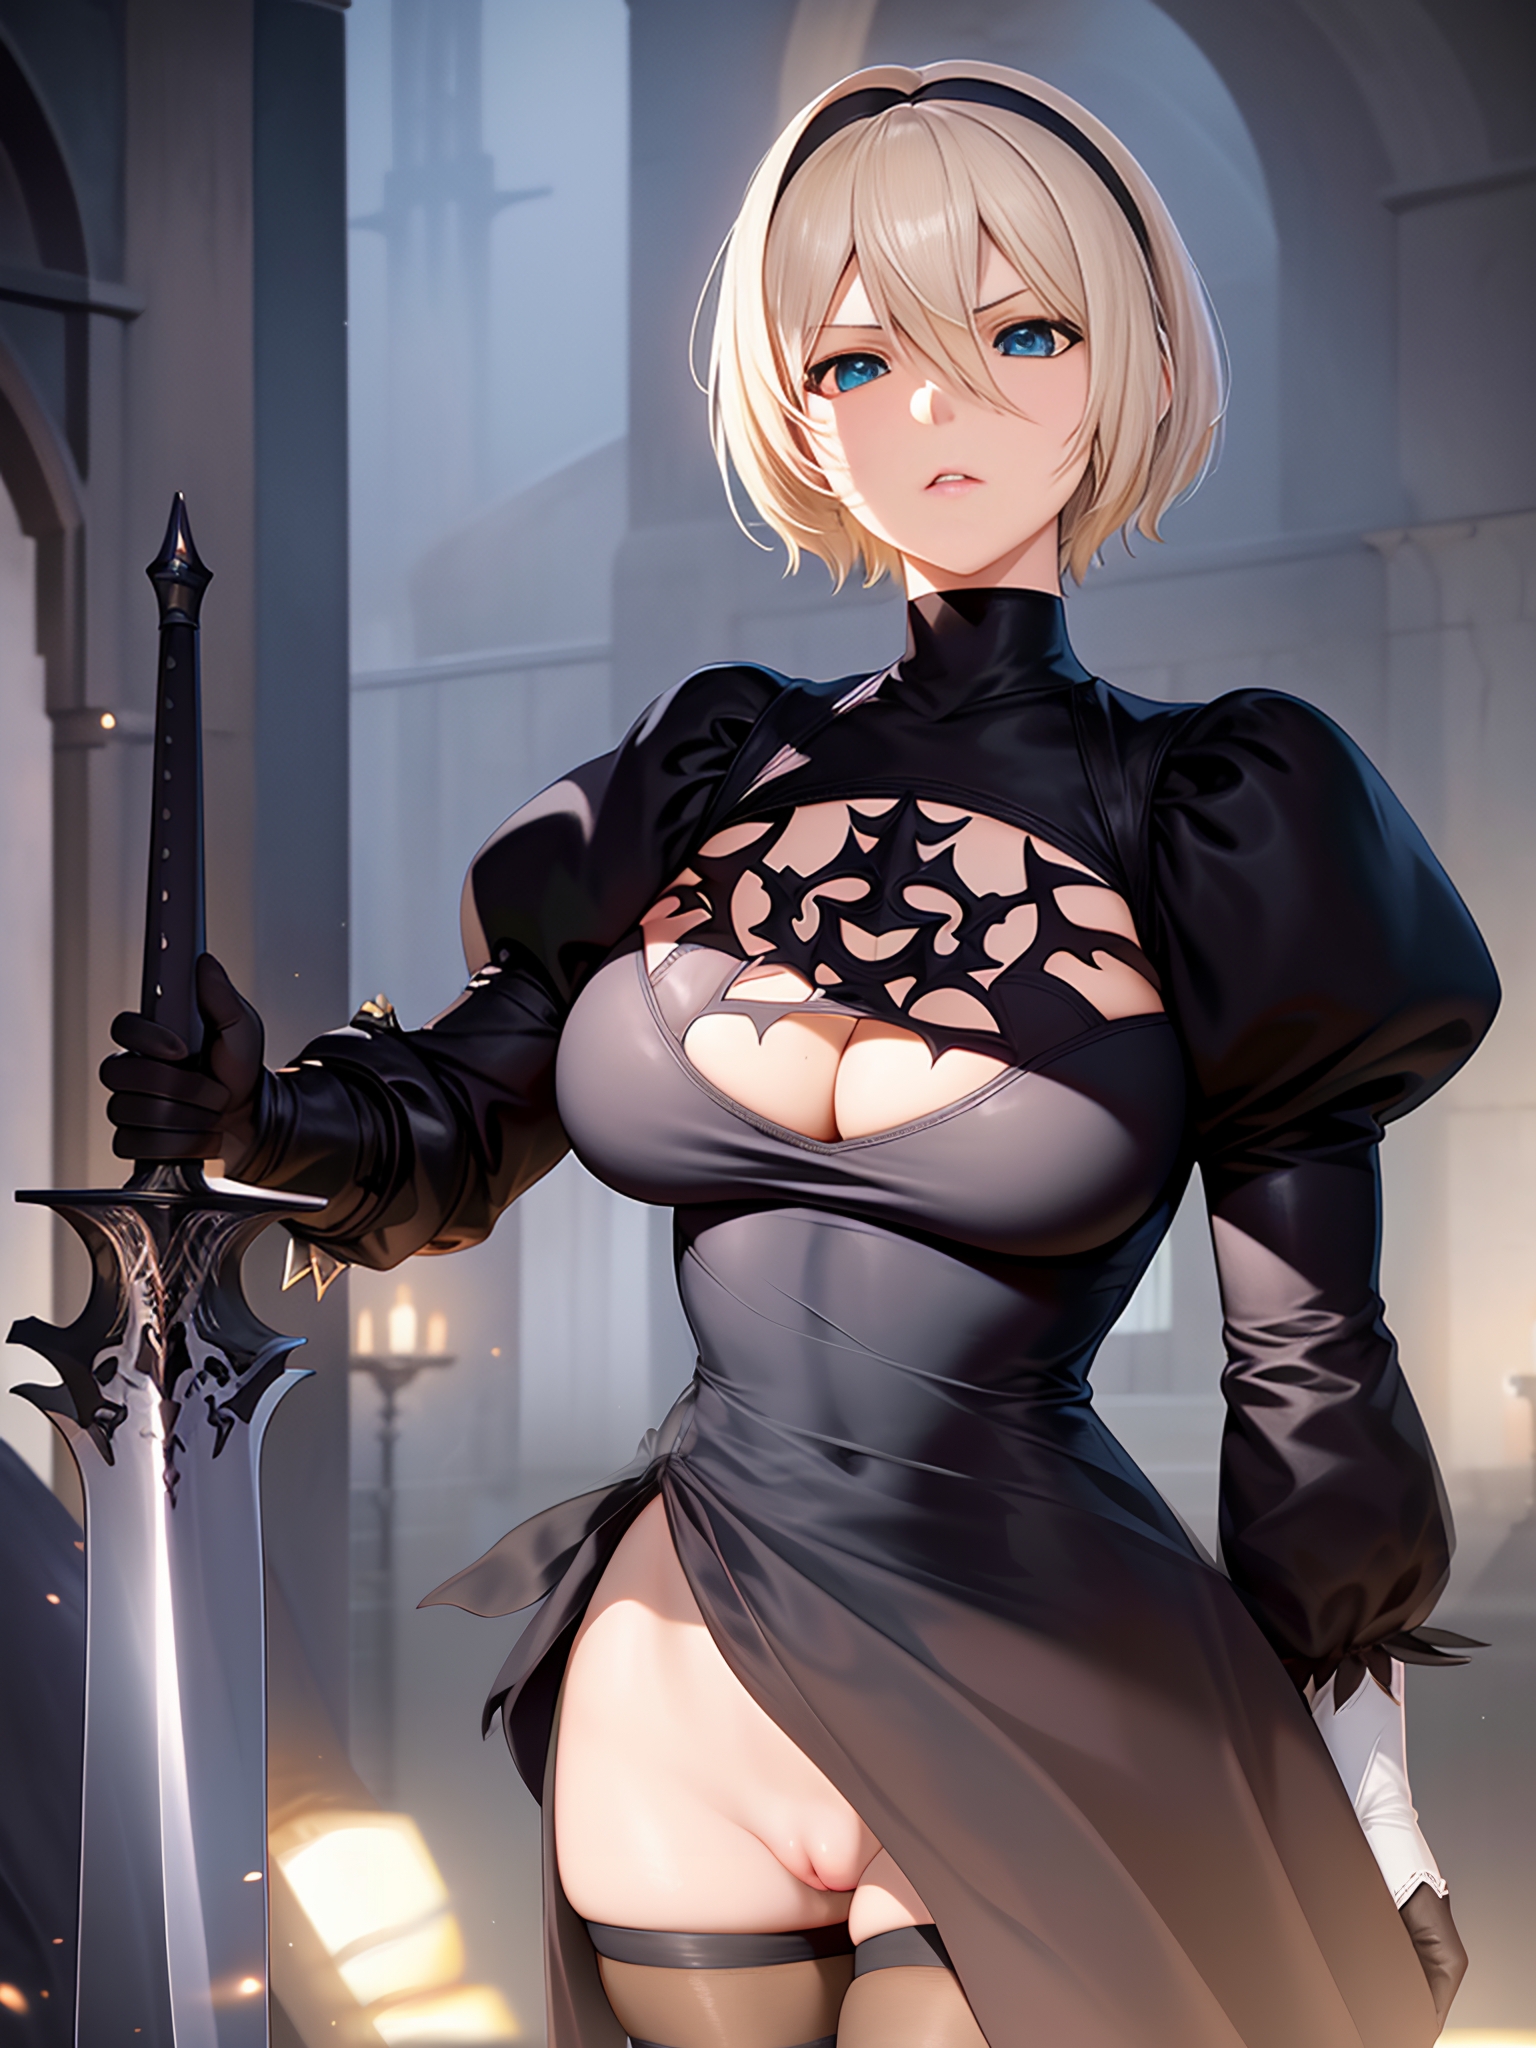 YoRHa No.2 Type B  2B  2b Yorha2b Yorha 2b Nier Automata Nier (series) Muscular Girl 3d Porn 3d Girl 3dnsfw 3dxgirls Abs Sexy Hot Bimbo Huge Boobs Huge Tits Muscles Musclegirl Pinup Perfect Body Fuck Hard Sexyhot Sexy Ass Sexy Woman Fake Tits Lips Latex Flexible Smirking Big Tits Huge Ass Big Booty Booty Fit Fitness Thicc Mom Milf Mature Mature Woman Spread Legs Spread Thick Thighs Horny Face Short Hair Hardcore Curvy Big Ass Big boobs Big Breasts Big Butt Brown Eyes Cleavage Fishnet Stockings Fishnet Nipple Piercing Piercing Belly Button Piercing Leather Jacket Thighs Jewels Pawg Ass Red head Tribal Weapon Armor Nude Boobs Pregnant Big Balls Big Nipples Lingerie Sexy Lingerie Womb Tattoo Face Tattoo Slut Whore Bitch Comic Hotpants Shorts Long Hair Smile Blonde Graffiti Splash Body Paint Paint Squatting Japanese Korean Asian Priestess Nun